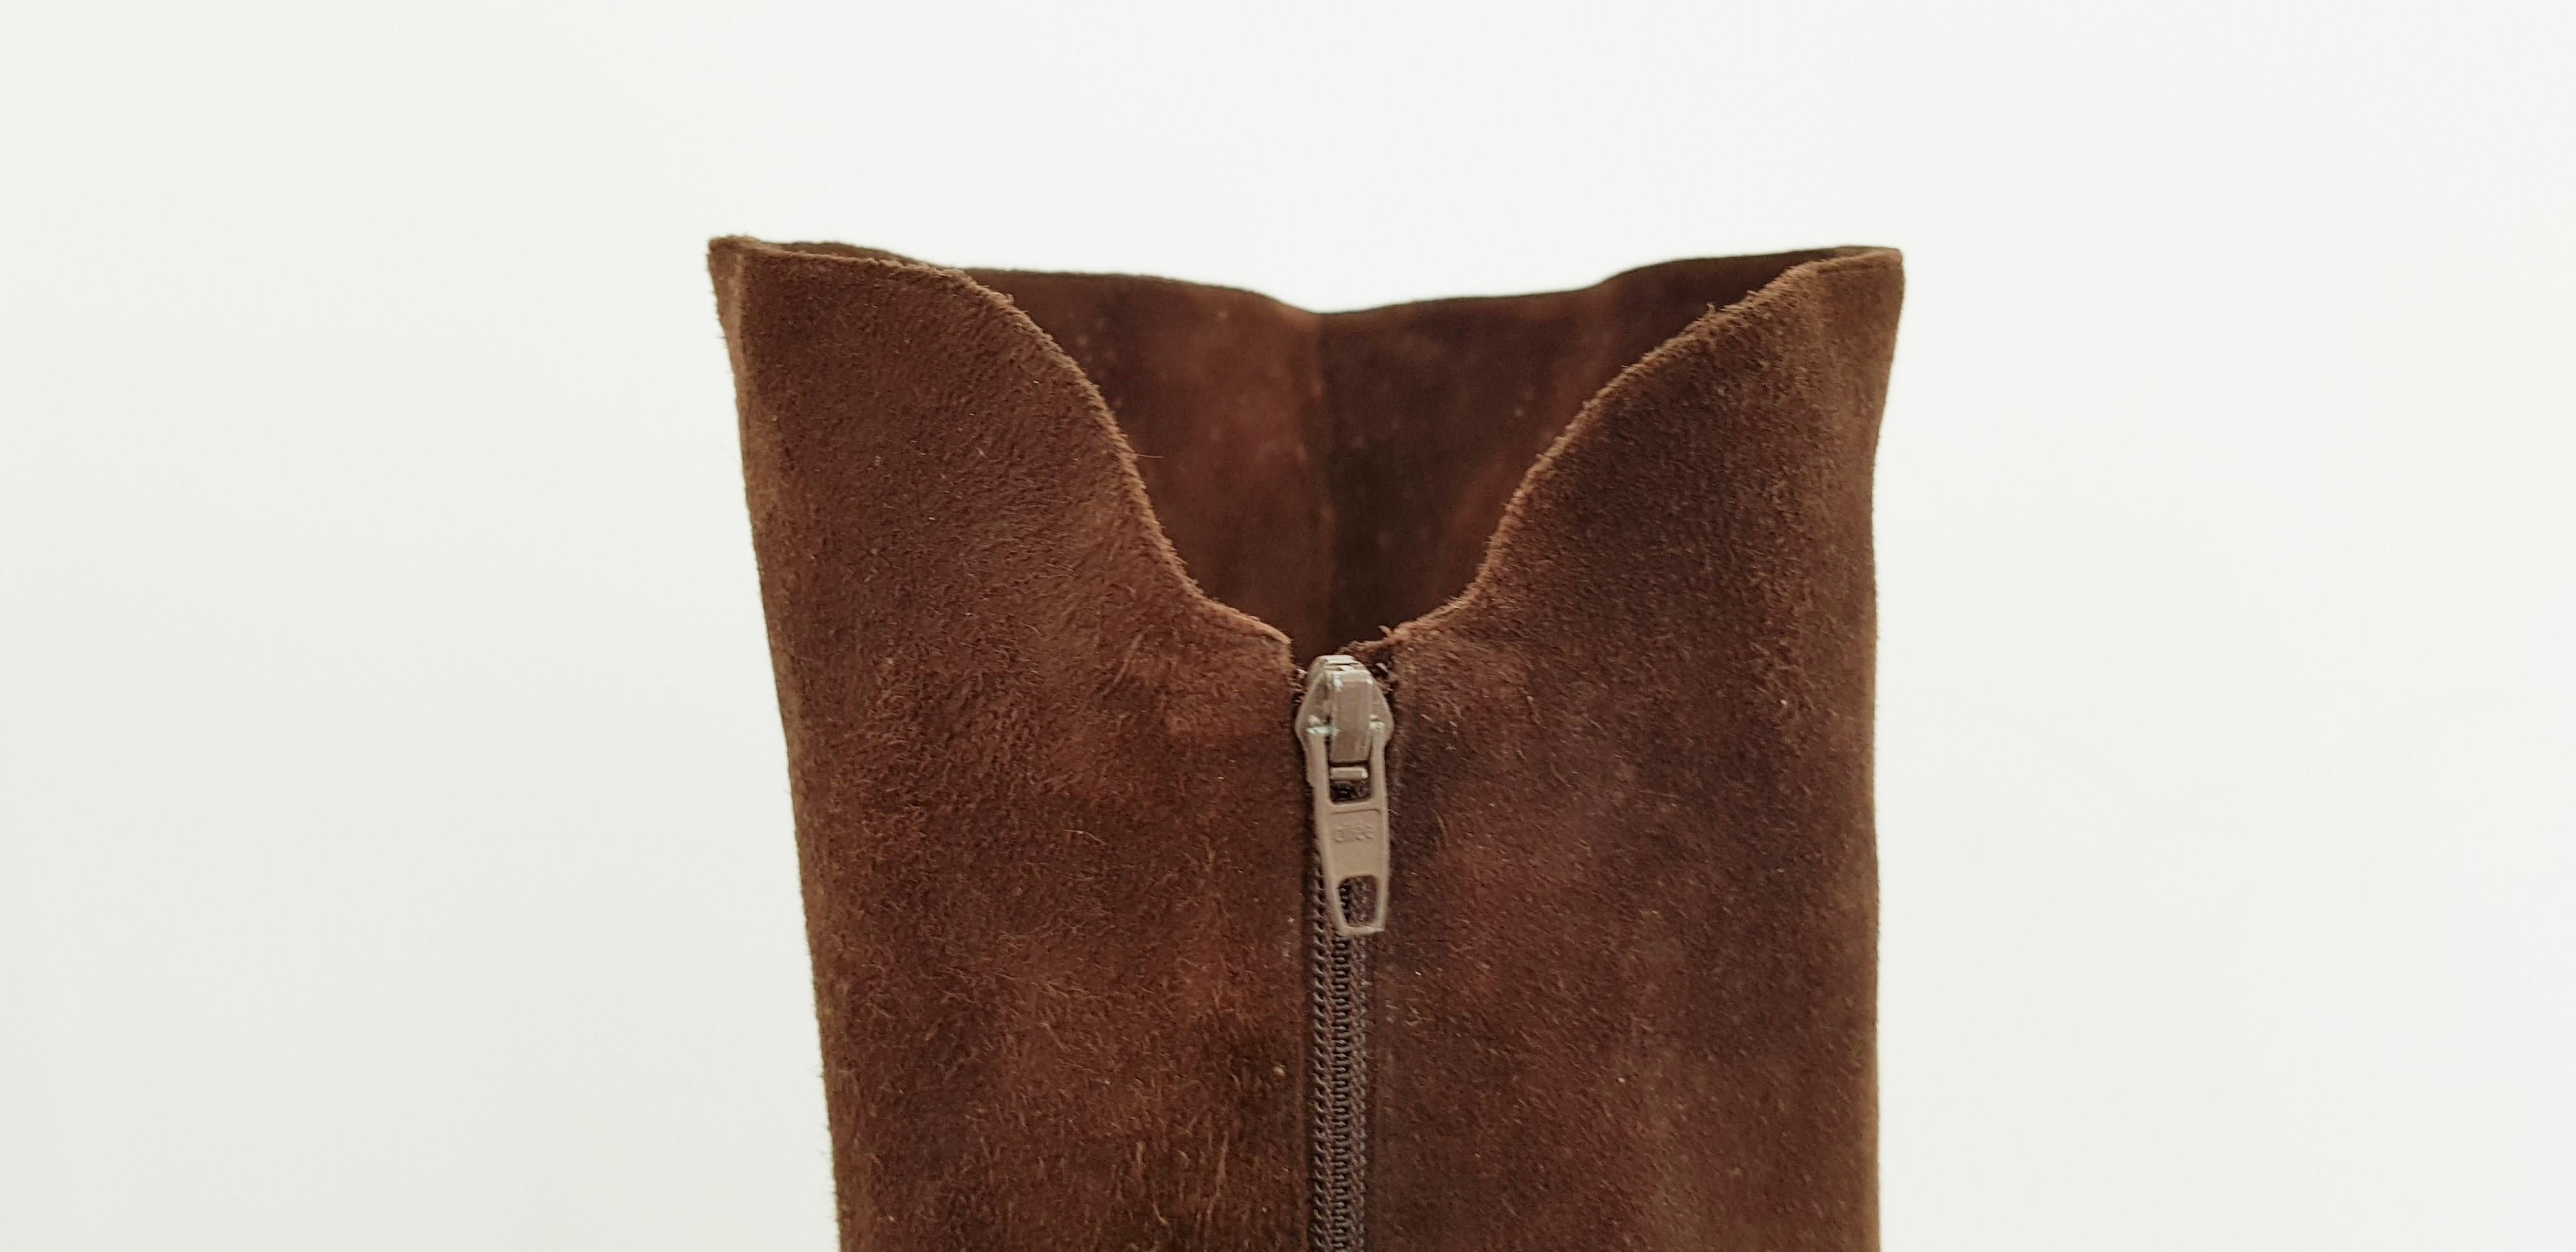 Maud Frizon Tall Brown Suede Boots - SIze 39 1/2 (59) For Sale 1